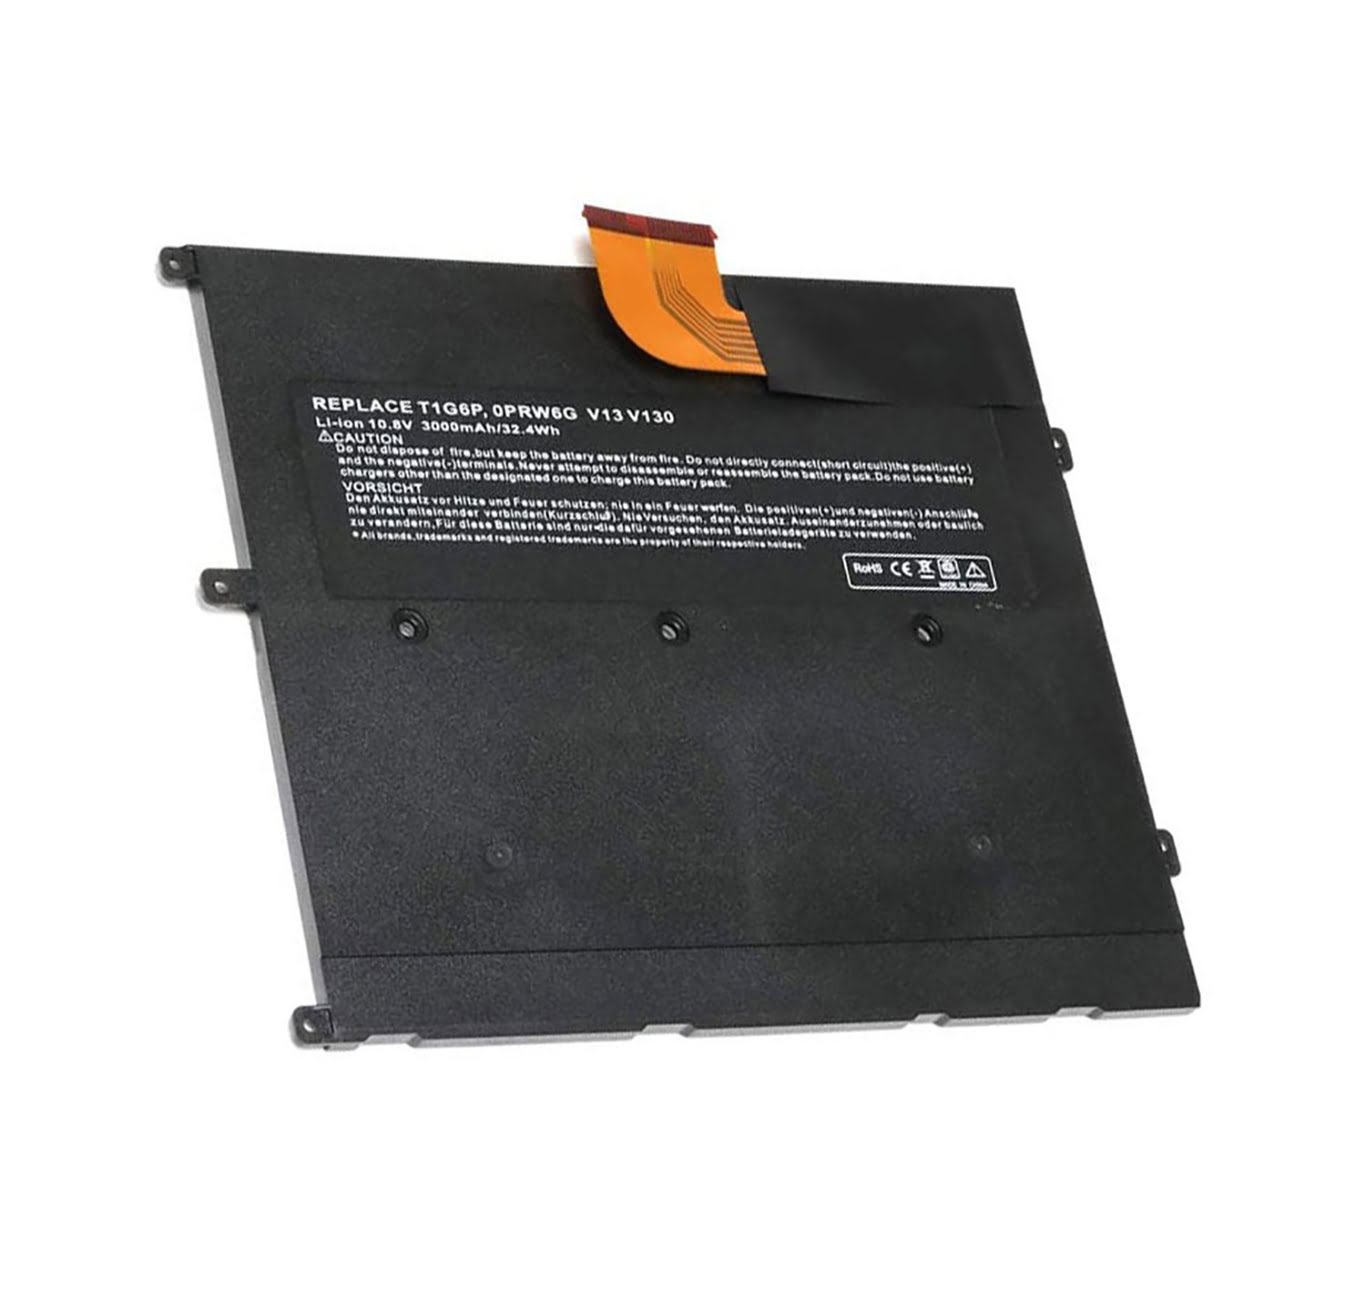 Dell 0449tx, 0ntg4j Laptop Battery For Latitude 13, Vostro V13 replacement